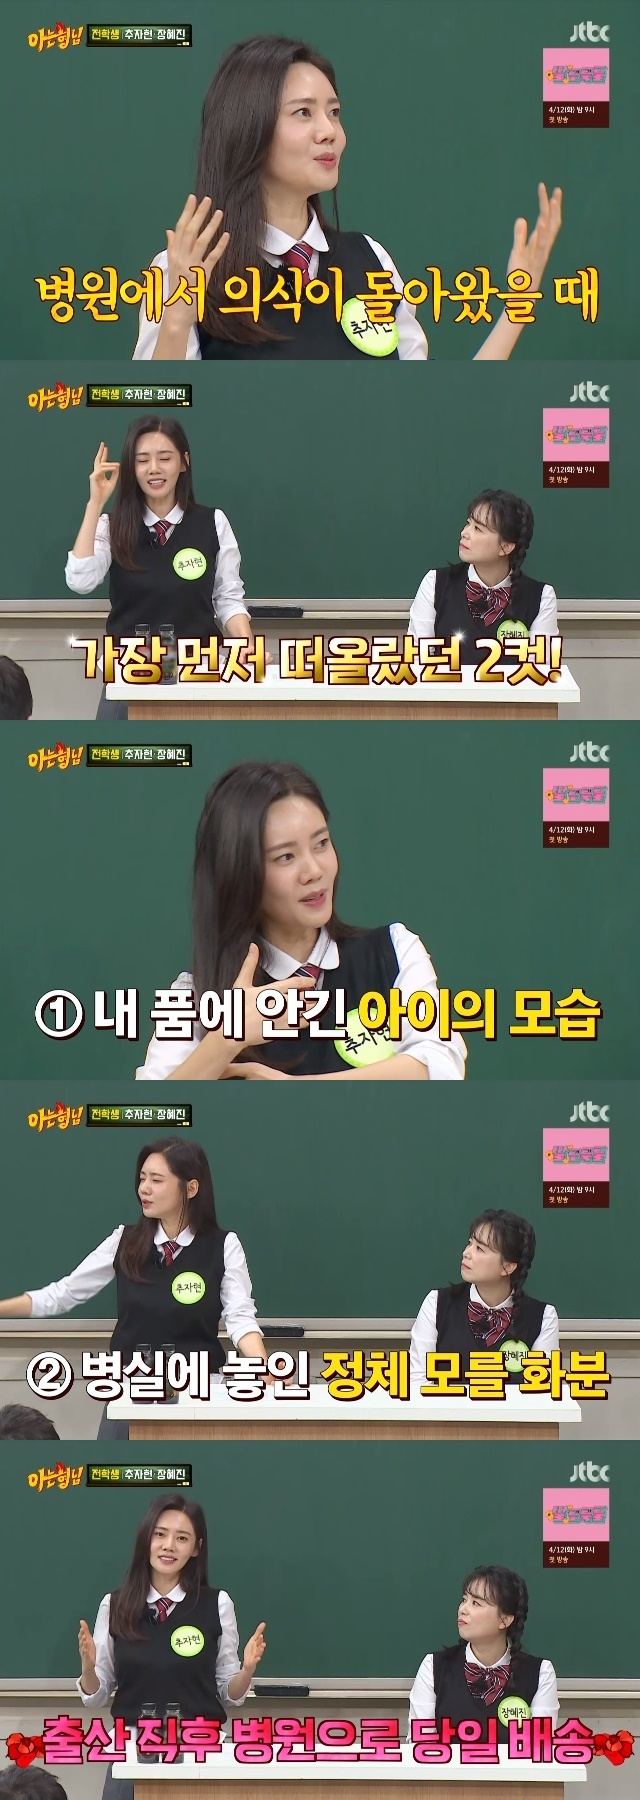 Choo Ja-hyun has revealed her infinite affection for her 5-year-old son, referring to the time of her birth, which was critical of pregnancy addiction.In the 326th JTBC entertainment Knowing Bros (hereinafter referred to as Knowing Bros) broadcast on April 2, Choo Ja-hyun and Jang Hye-jin, the main characters of JTBCs new tree drama Green Mothers Sams Club, transferred to their brothers school.Choo Ja-hyun said that the atmosphere of the Green Sams Club film is so good, and that he is having a lot of conversation with Lee Yo-won and Jang Hye-jin, especially with a common denominator called Ae Mom.Choo Ja-hyun said, My role in the drama is intelligence and the oldest, and (in reality, my child) is only five years old.When I postpone it, I say, You should not do that. If you cut it, I ask for advice, saying, So what should I do to send my child to kindergarten?Lee Yo-won and Jang Hye-jin are the counselors, he explained.Choo Ja-hyuns son Sea turned five this year.Choo Ja-hyun said, The child who walked with the walker is now going to school with a kindergarten bag. I was surprised to have a child for the first time.I took him to the ad shoot once, and the concept was to wear a dress and make up, so he said Week because he said Is your mom pretty? Nowadays, he only talks about shit and farts.Then he got up the next morning, rubbed his eyes (in the bathroom) and said, Mom, actually, I was so pretty yesterday. She has a hook coming in.When I get tired in the morning, I bring a bag of medicine and throw it and say, Mom, take medicine. Choo Ja-hyun revealed the misfortune of Seo Jang-hoon and mentioned the health problems he had during his birth.At the time of giving birth to her son Sea in 2018, Choo Ja-hyun had temporary seizures due to pregnancy addiction and was transferred to the emergency room for treatment, followed by treatment in the intensive care unit with lung abnormalities.Choo Ja-hyun said, I had a baby and an accident. I was ill and I was treated and opened my eyes. I was a little bit Why am I here Dream dream dream dream dreaming.I had a baby in my arms and turned my head and a pot came in. It was from Seo Jang-hoon.I had a baby and dreamed, and I thought, How did you know that Janghoon had a baby?Usually, when you have a baby, the knight goes out and sends a gift to the cookery, but my brother sends a pot at the time of childbirth. Then Seo Jang-hoon said, I can not remember it for a long time. I went to the Sangmongmong recording the day before and asked where the hospital was because the staff had a baby.I have a child when I am old and I have had a lot of things ... I sent to congratulate you anyway. Choo Ja-hyun expressed his gratitude that Seo Jang-hoon is the people.